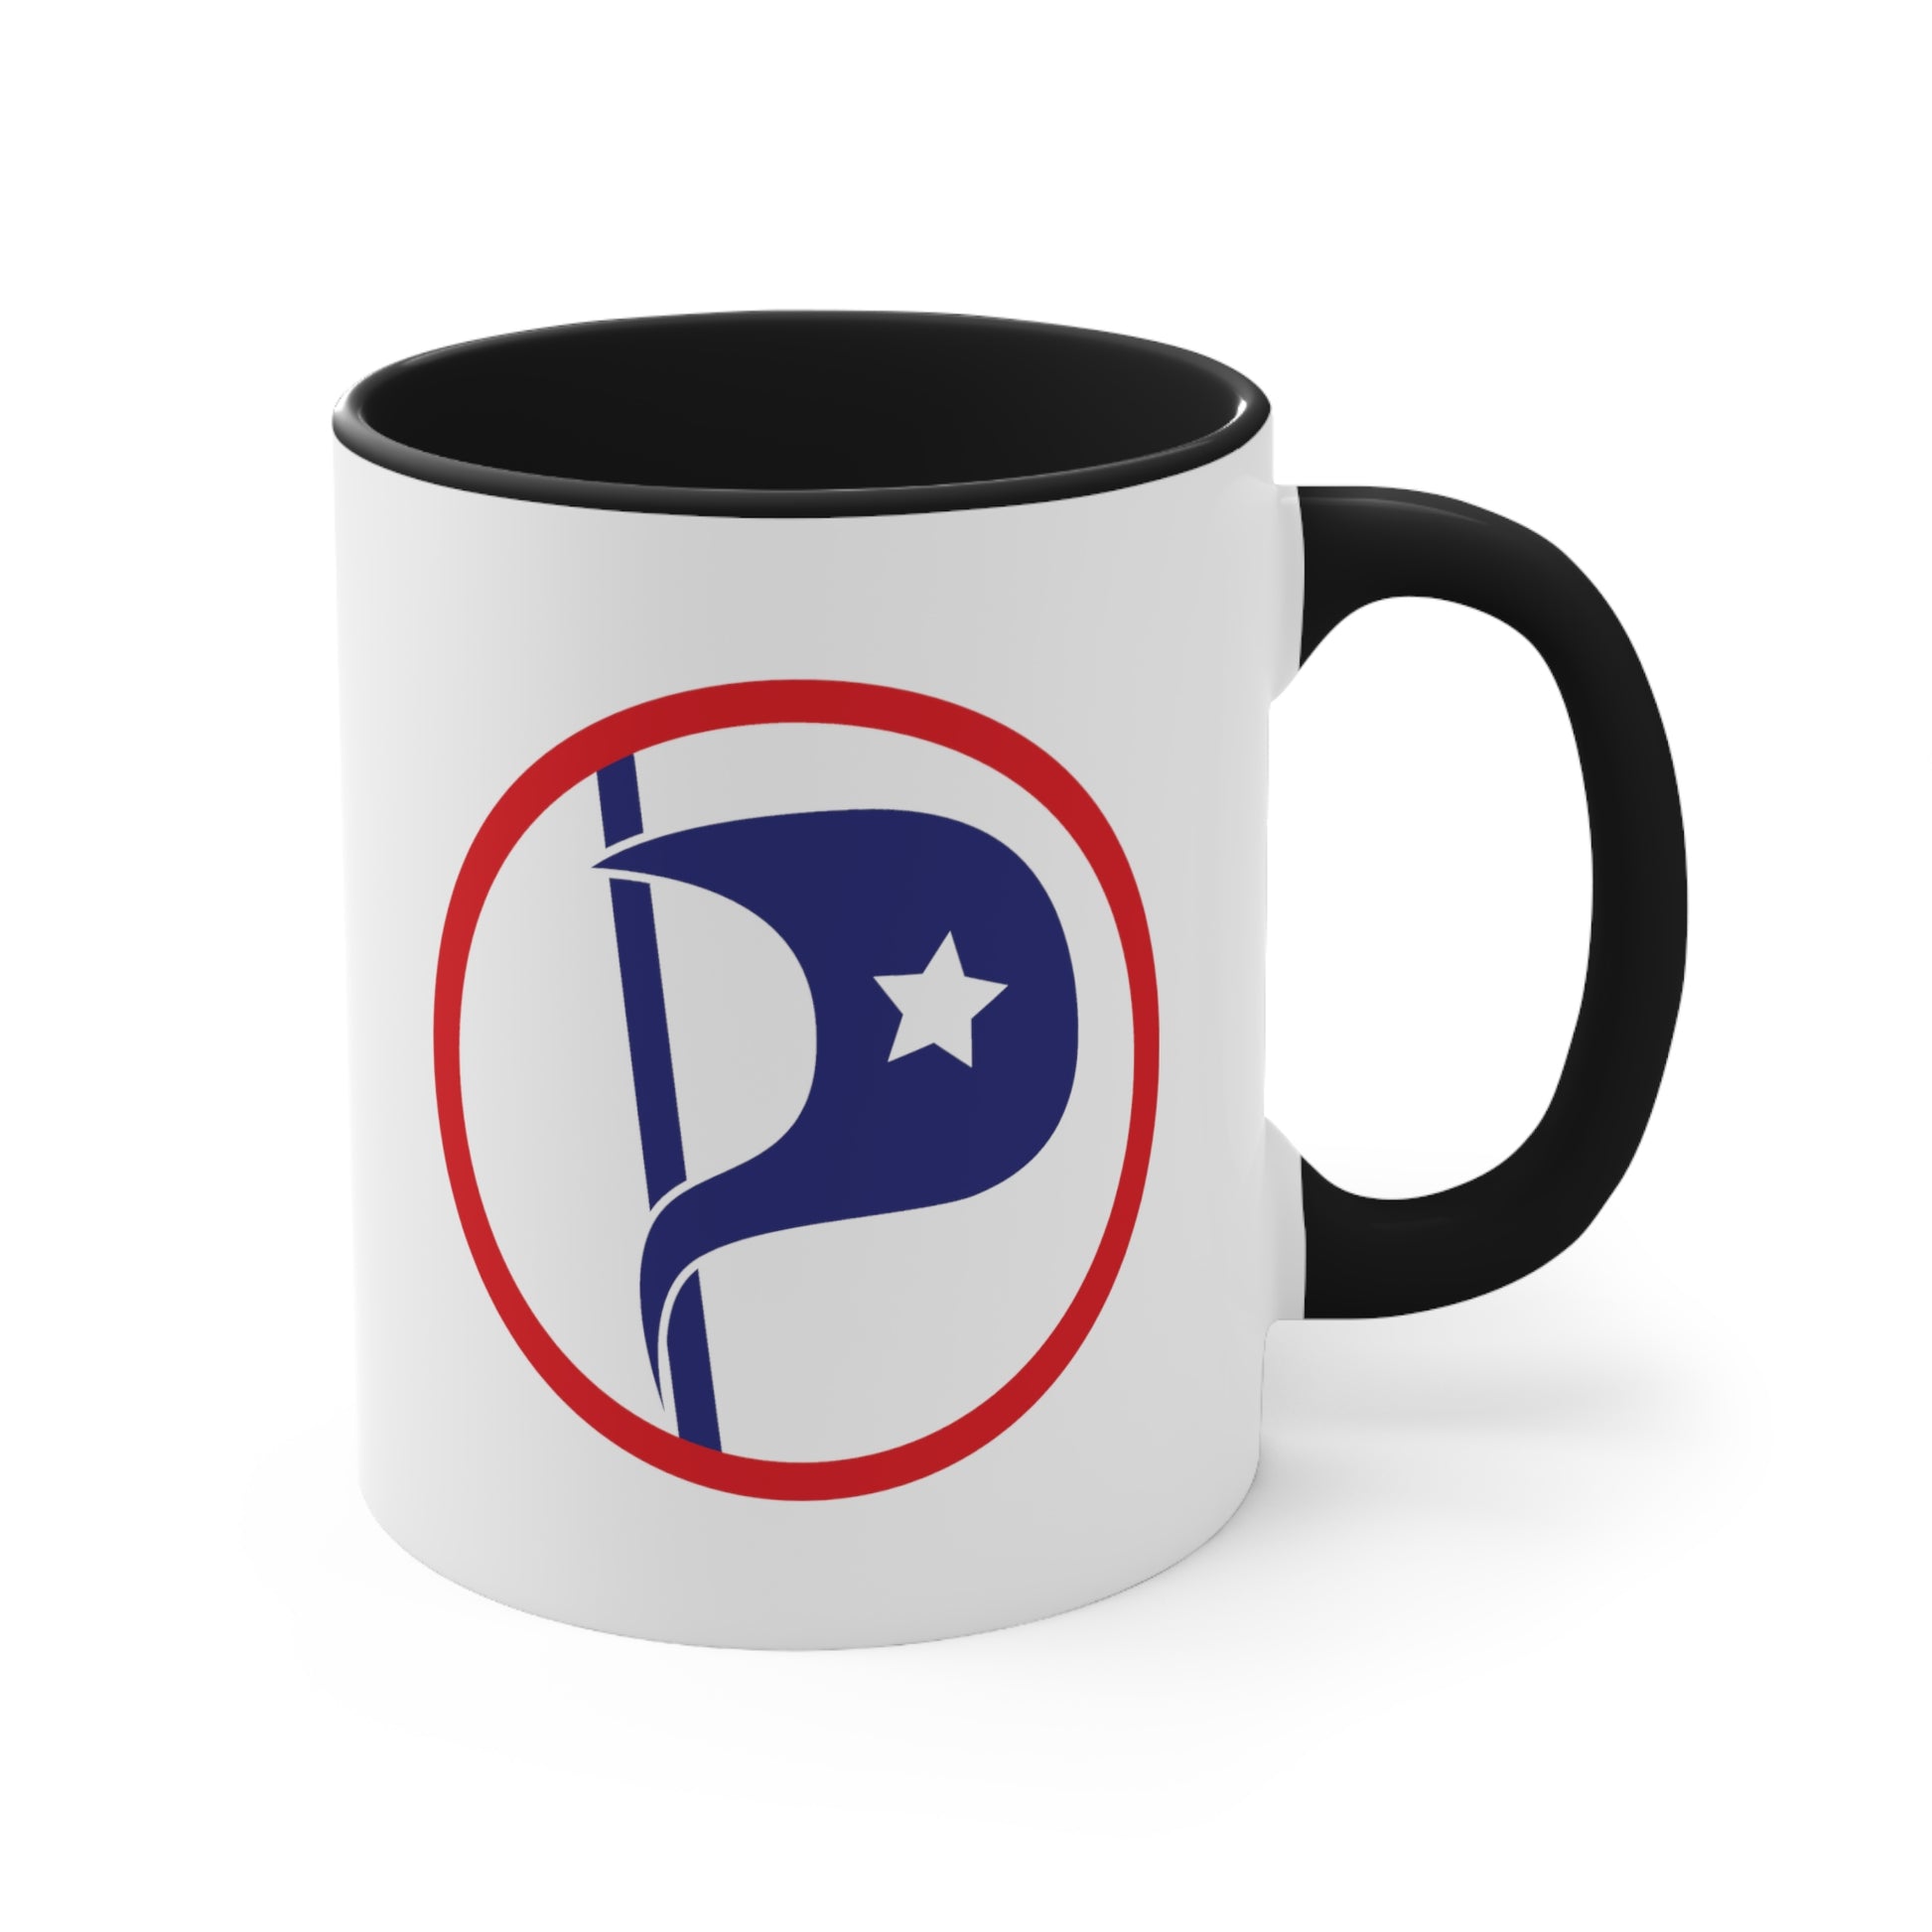 US Pirate Party Coffee Mug - Double Sided Black Accent White Ceramic 11oz by TheGlassyLass.com